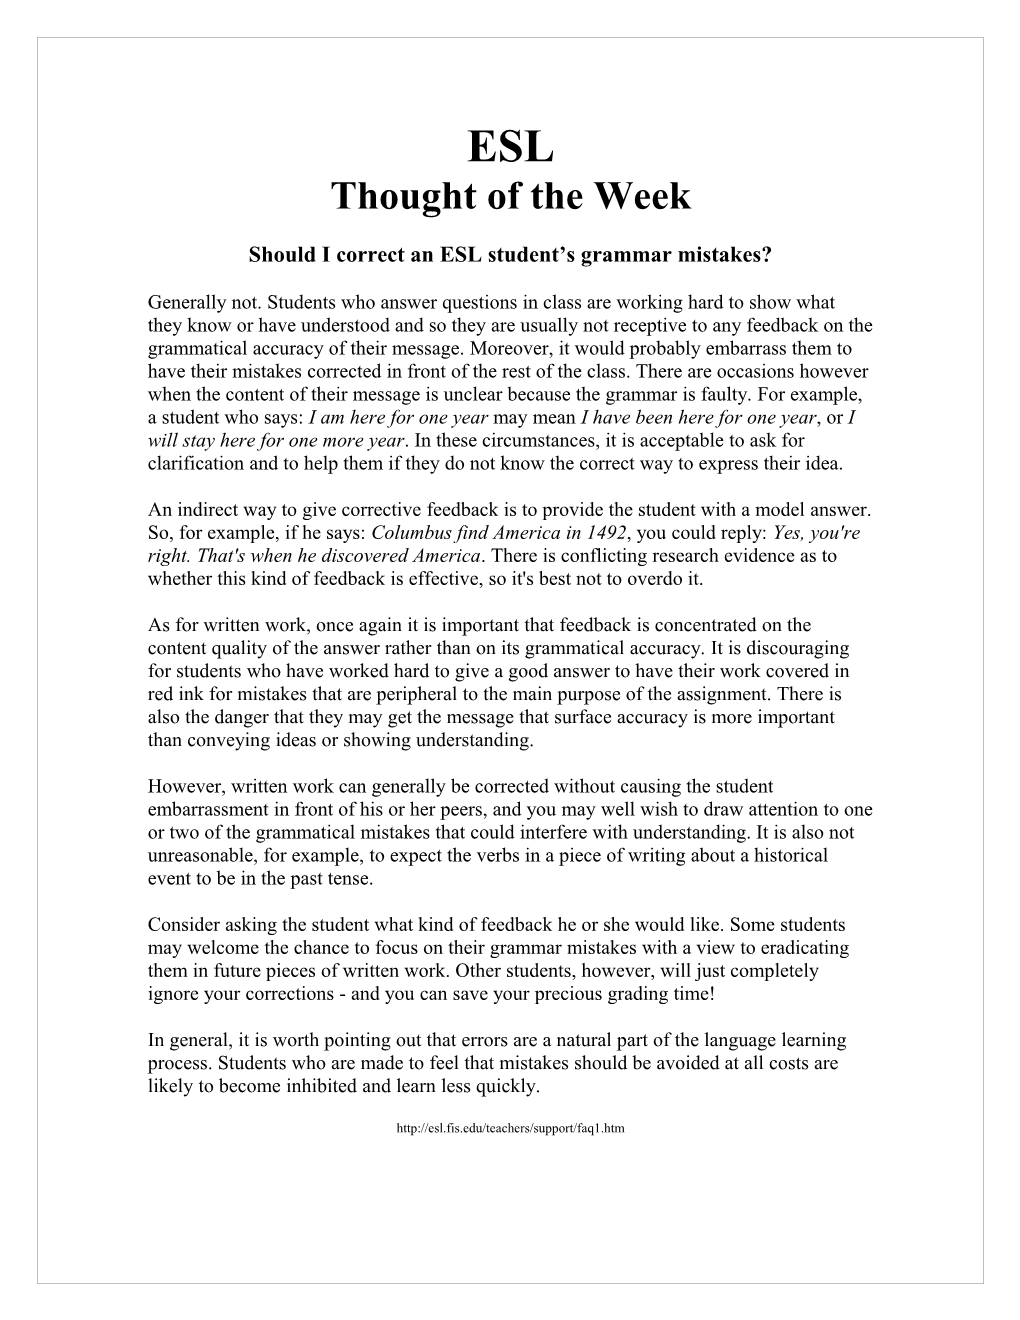 ESL: Thought of the Week